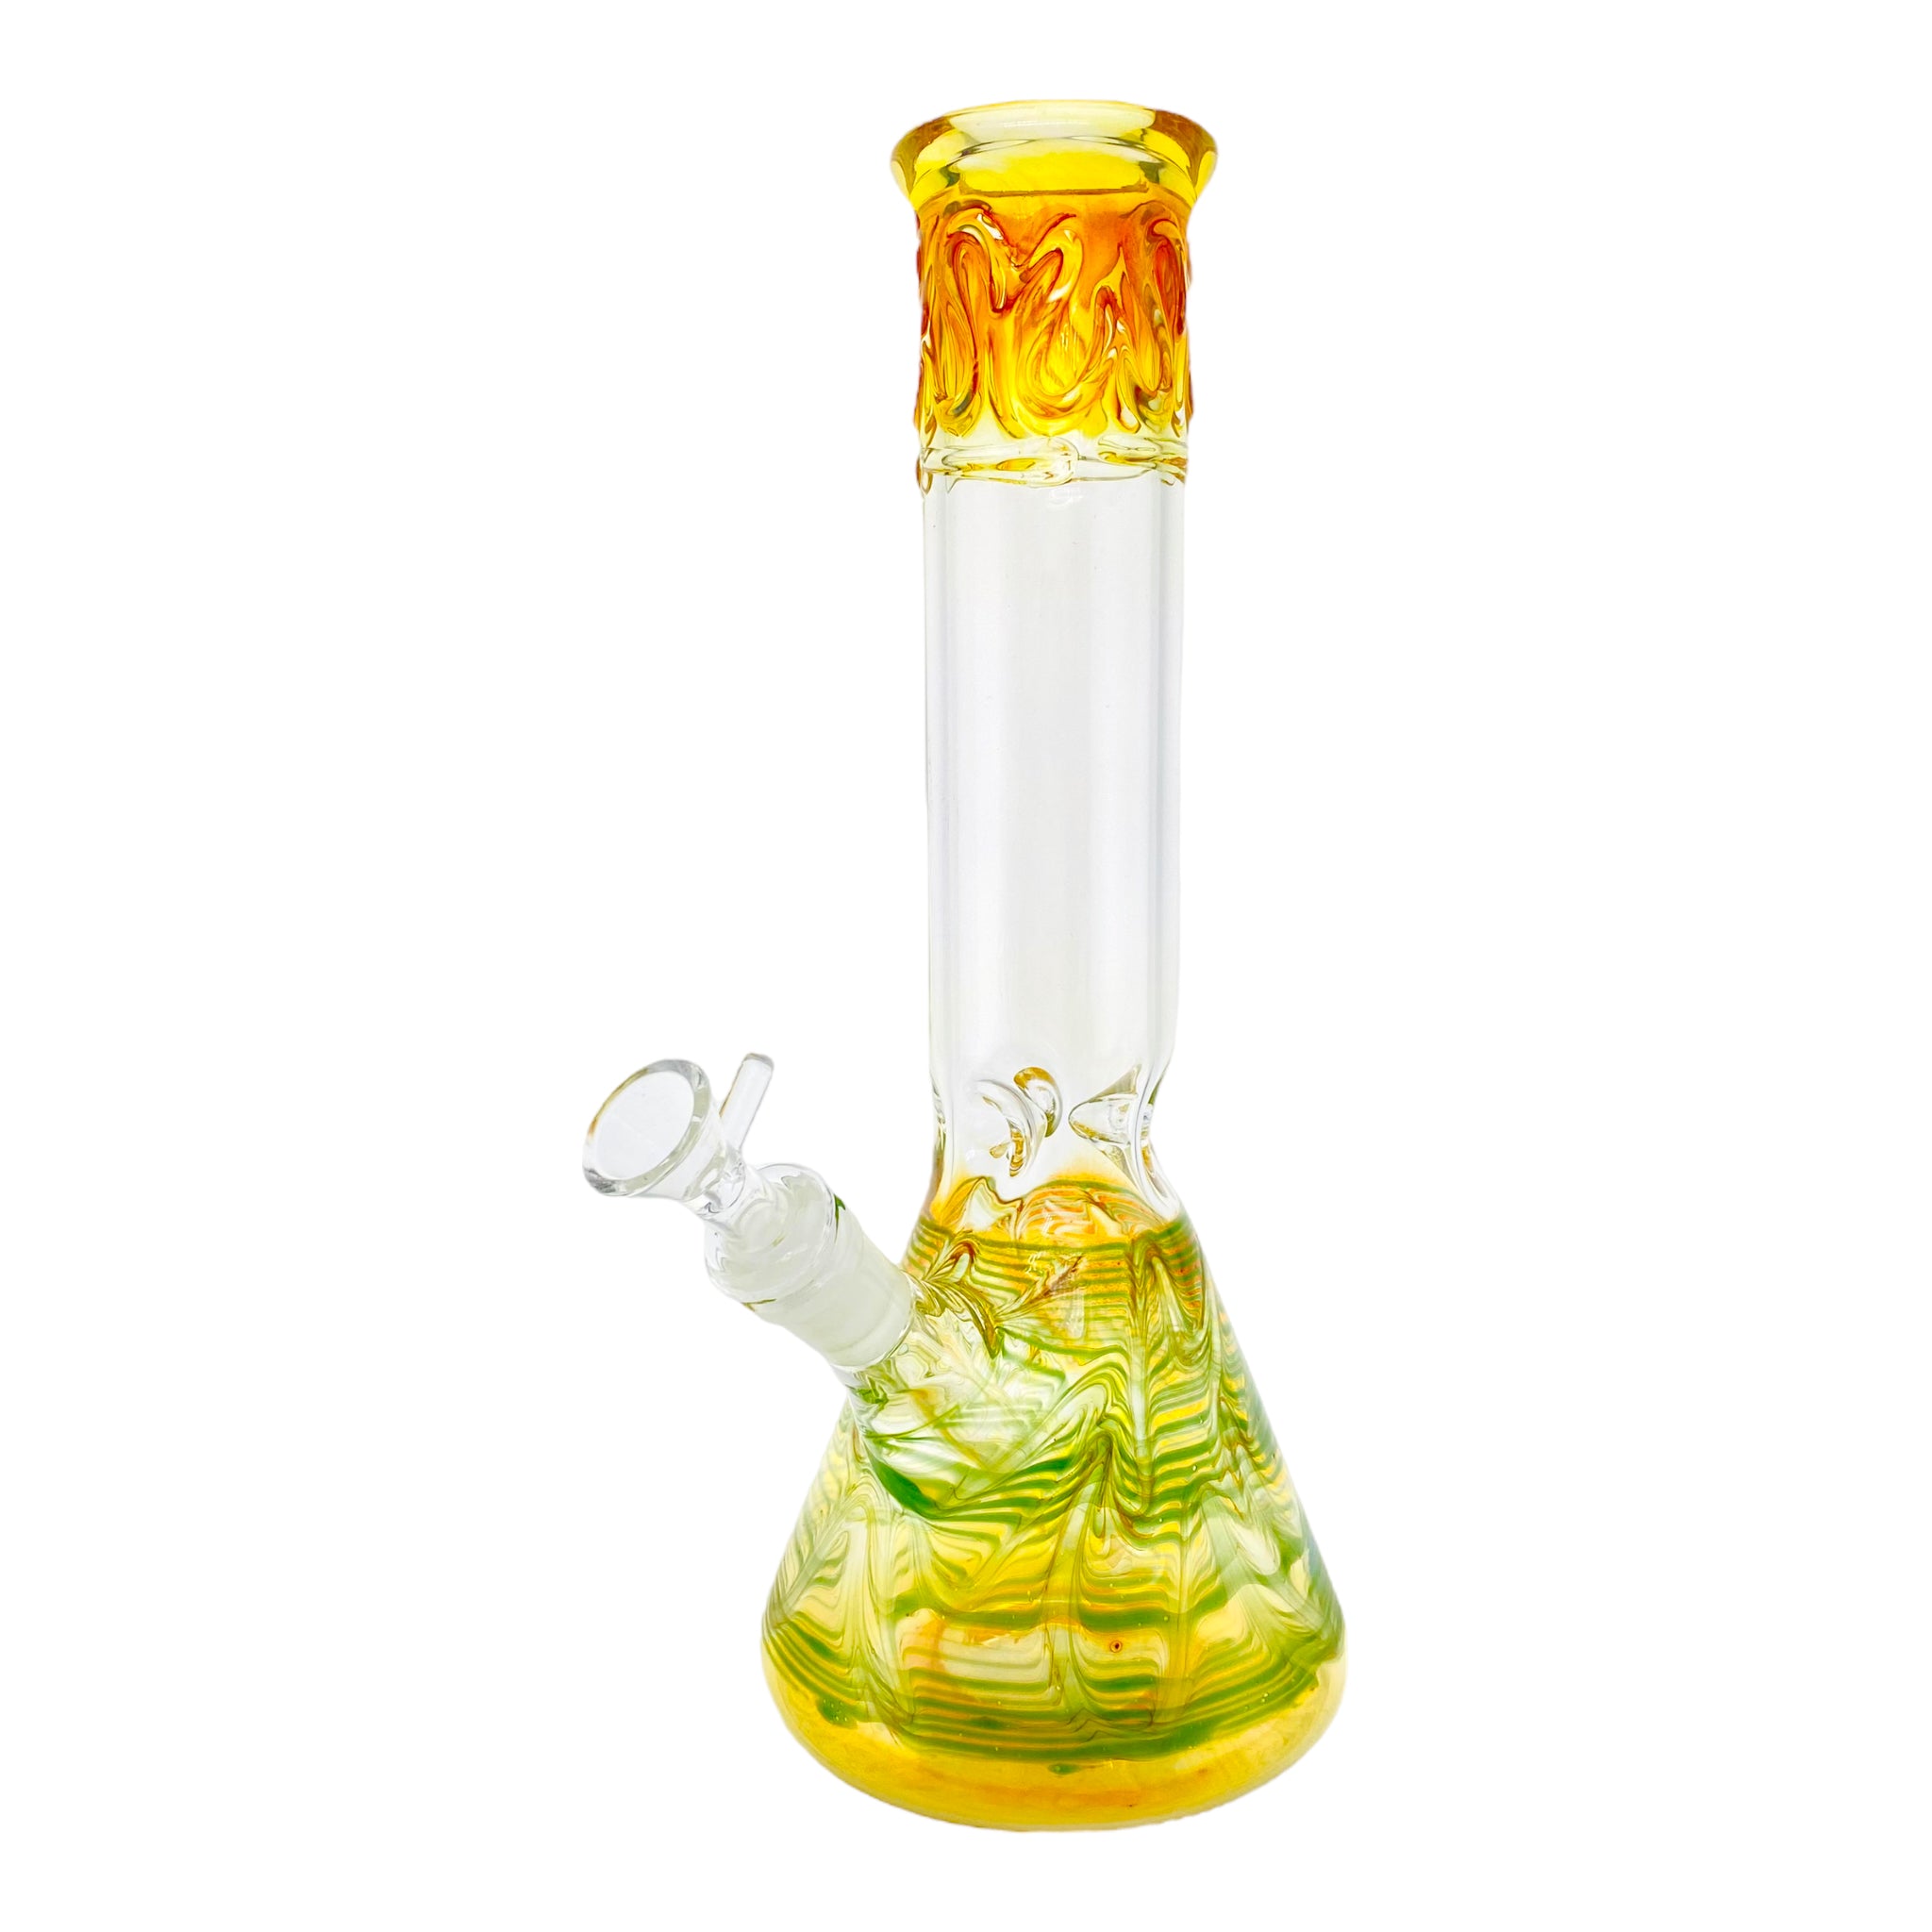 12 Inch Beaker Bong With Color Changing Fuming And Green Wrap And Rake